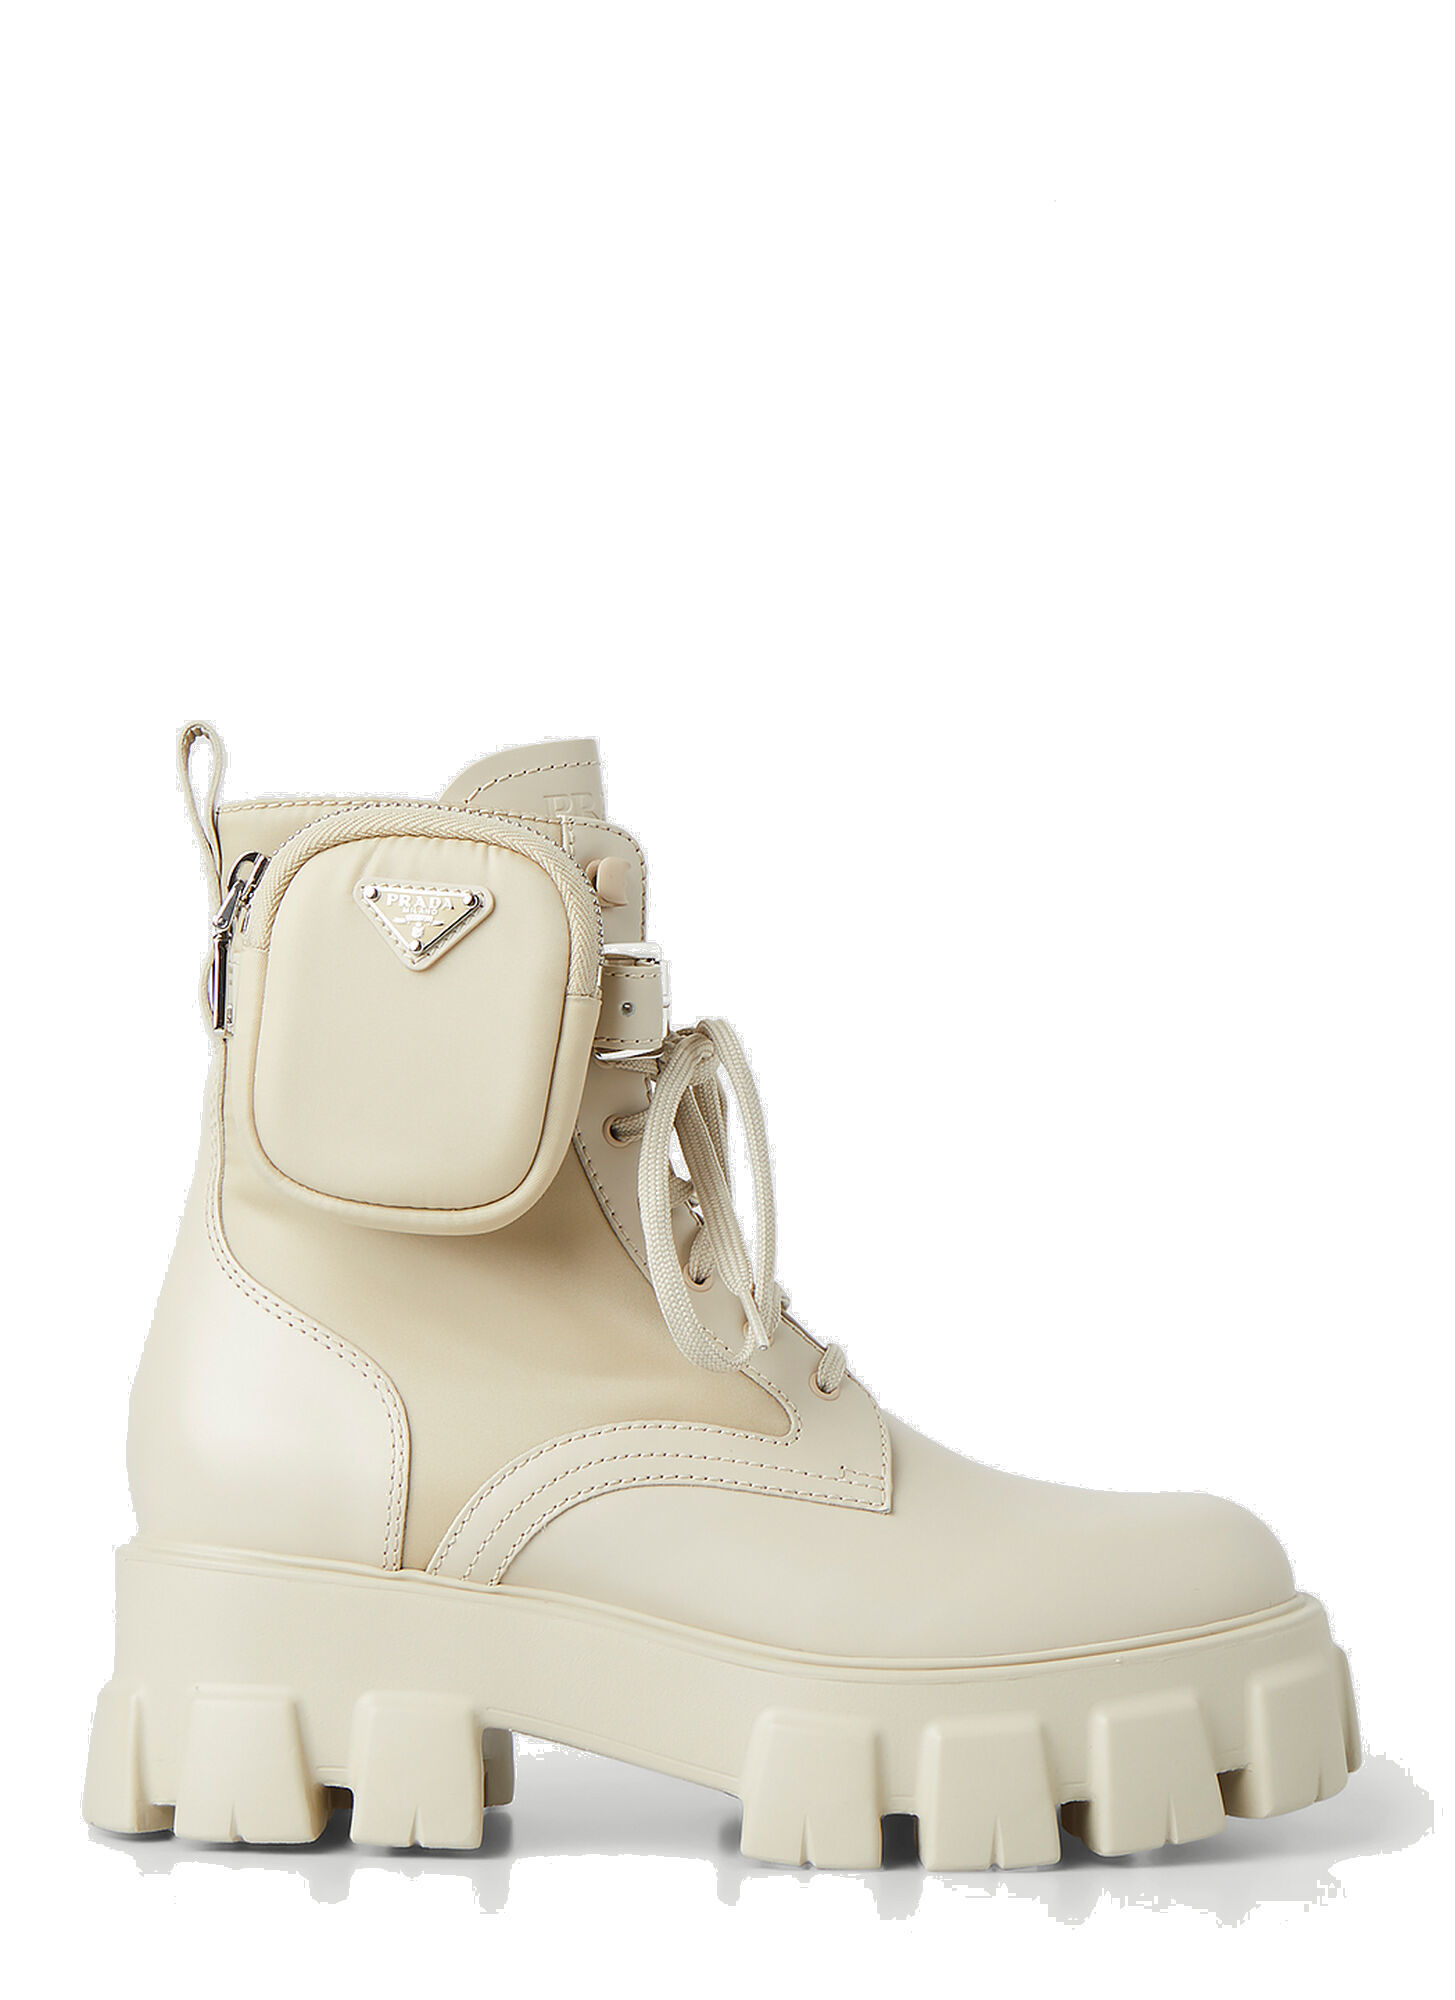 Monolith Ankle Boots in Beige Prada